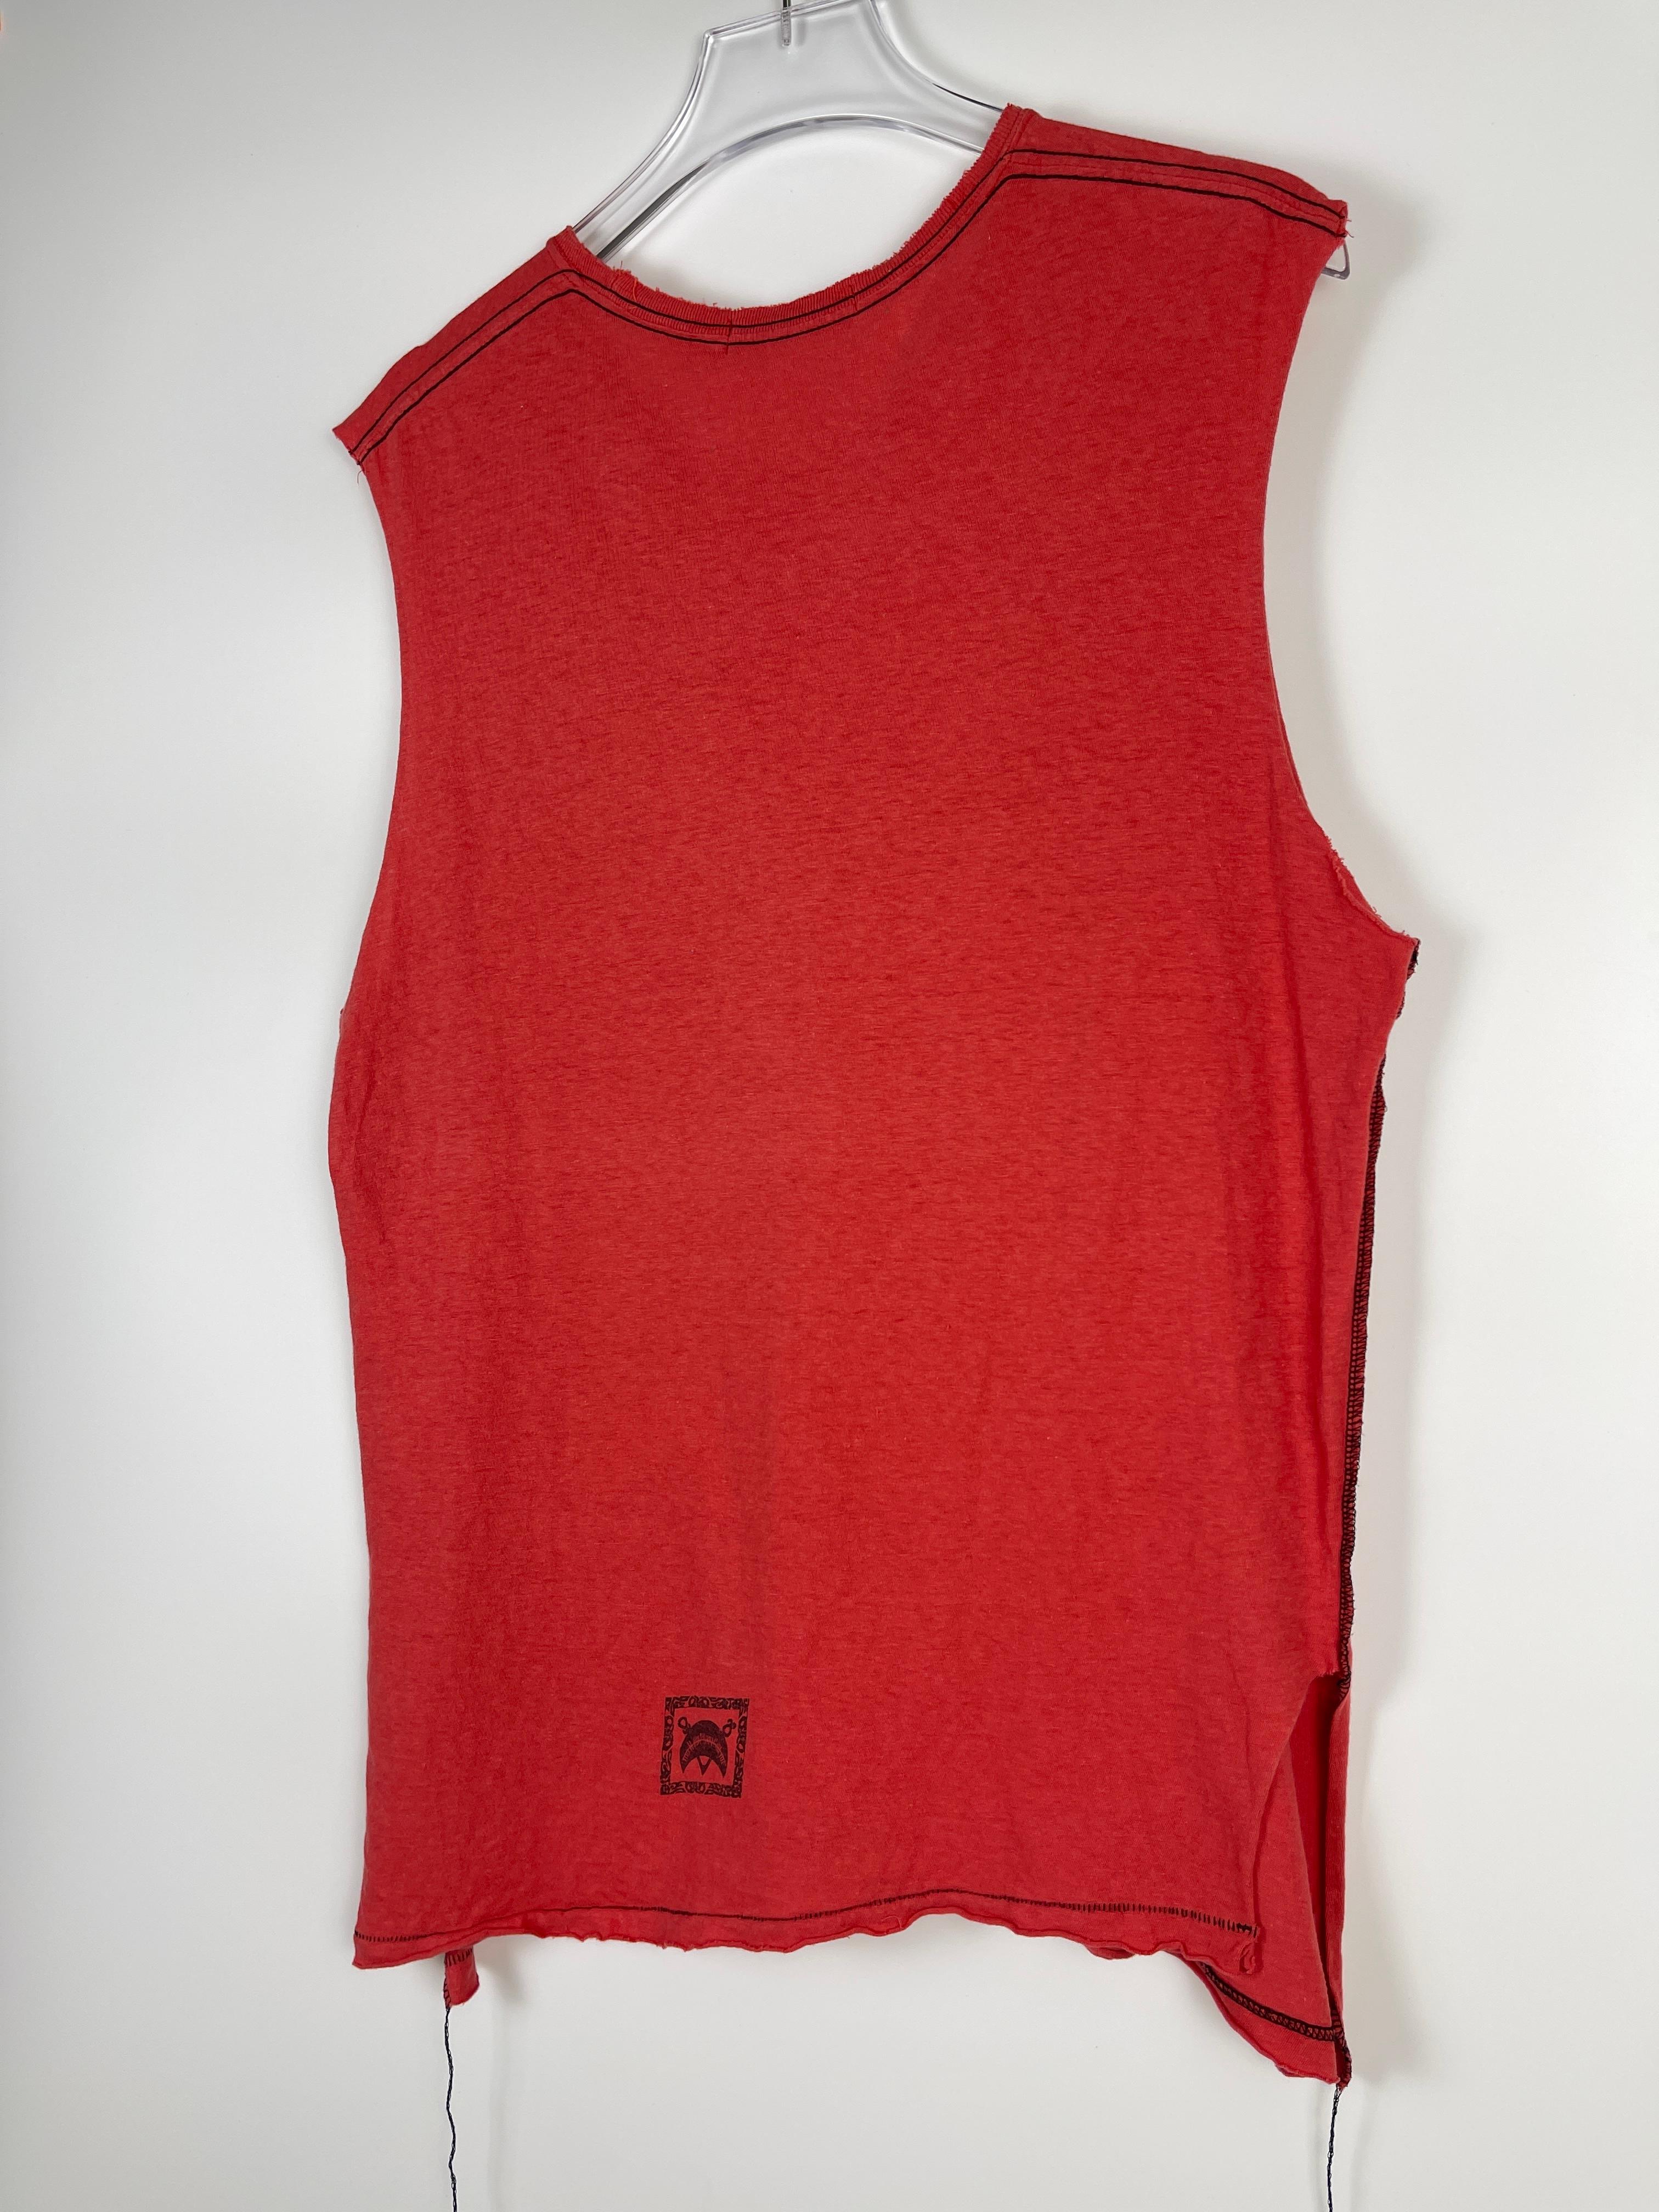 Undercover S/S2003 Scab Skull Tank-Top For Sale 1